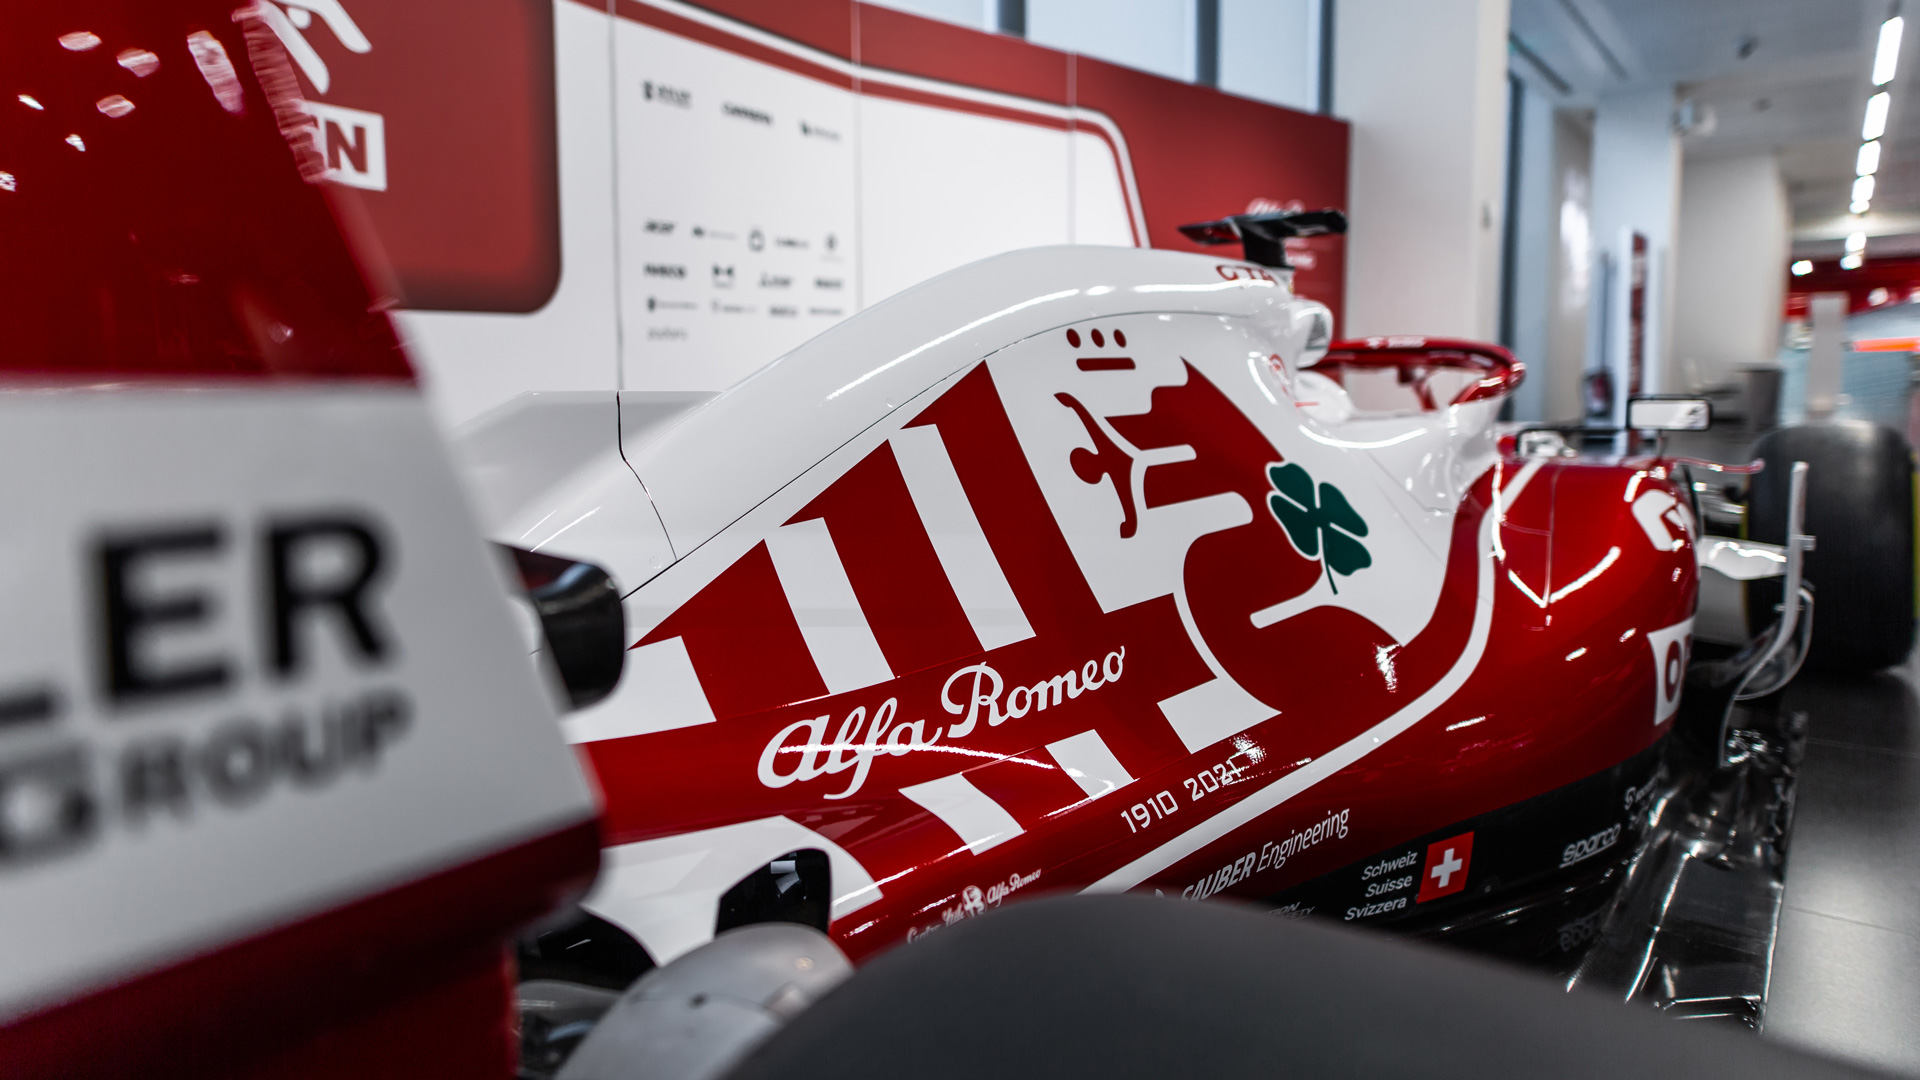 Alfa Romeo will be staying in F1 after extending deal with Sauber